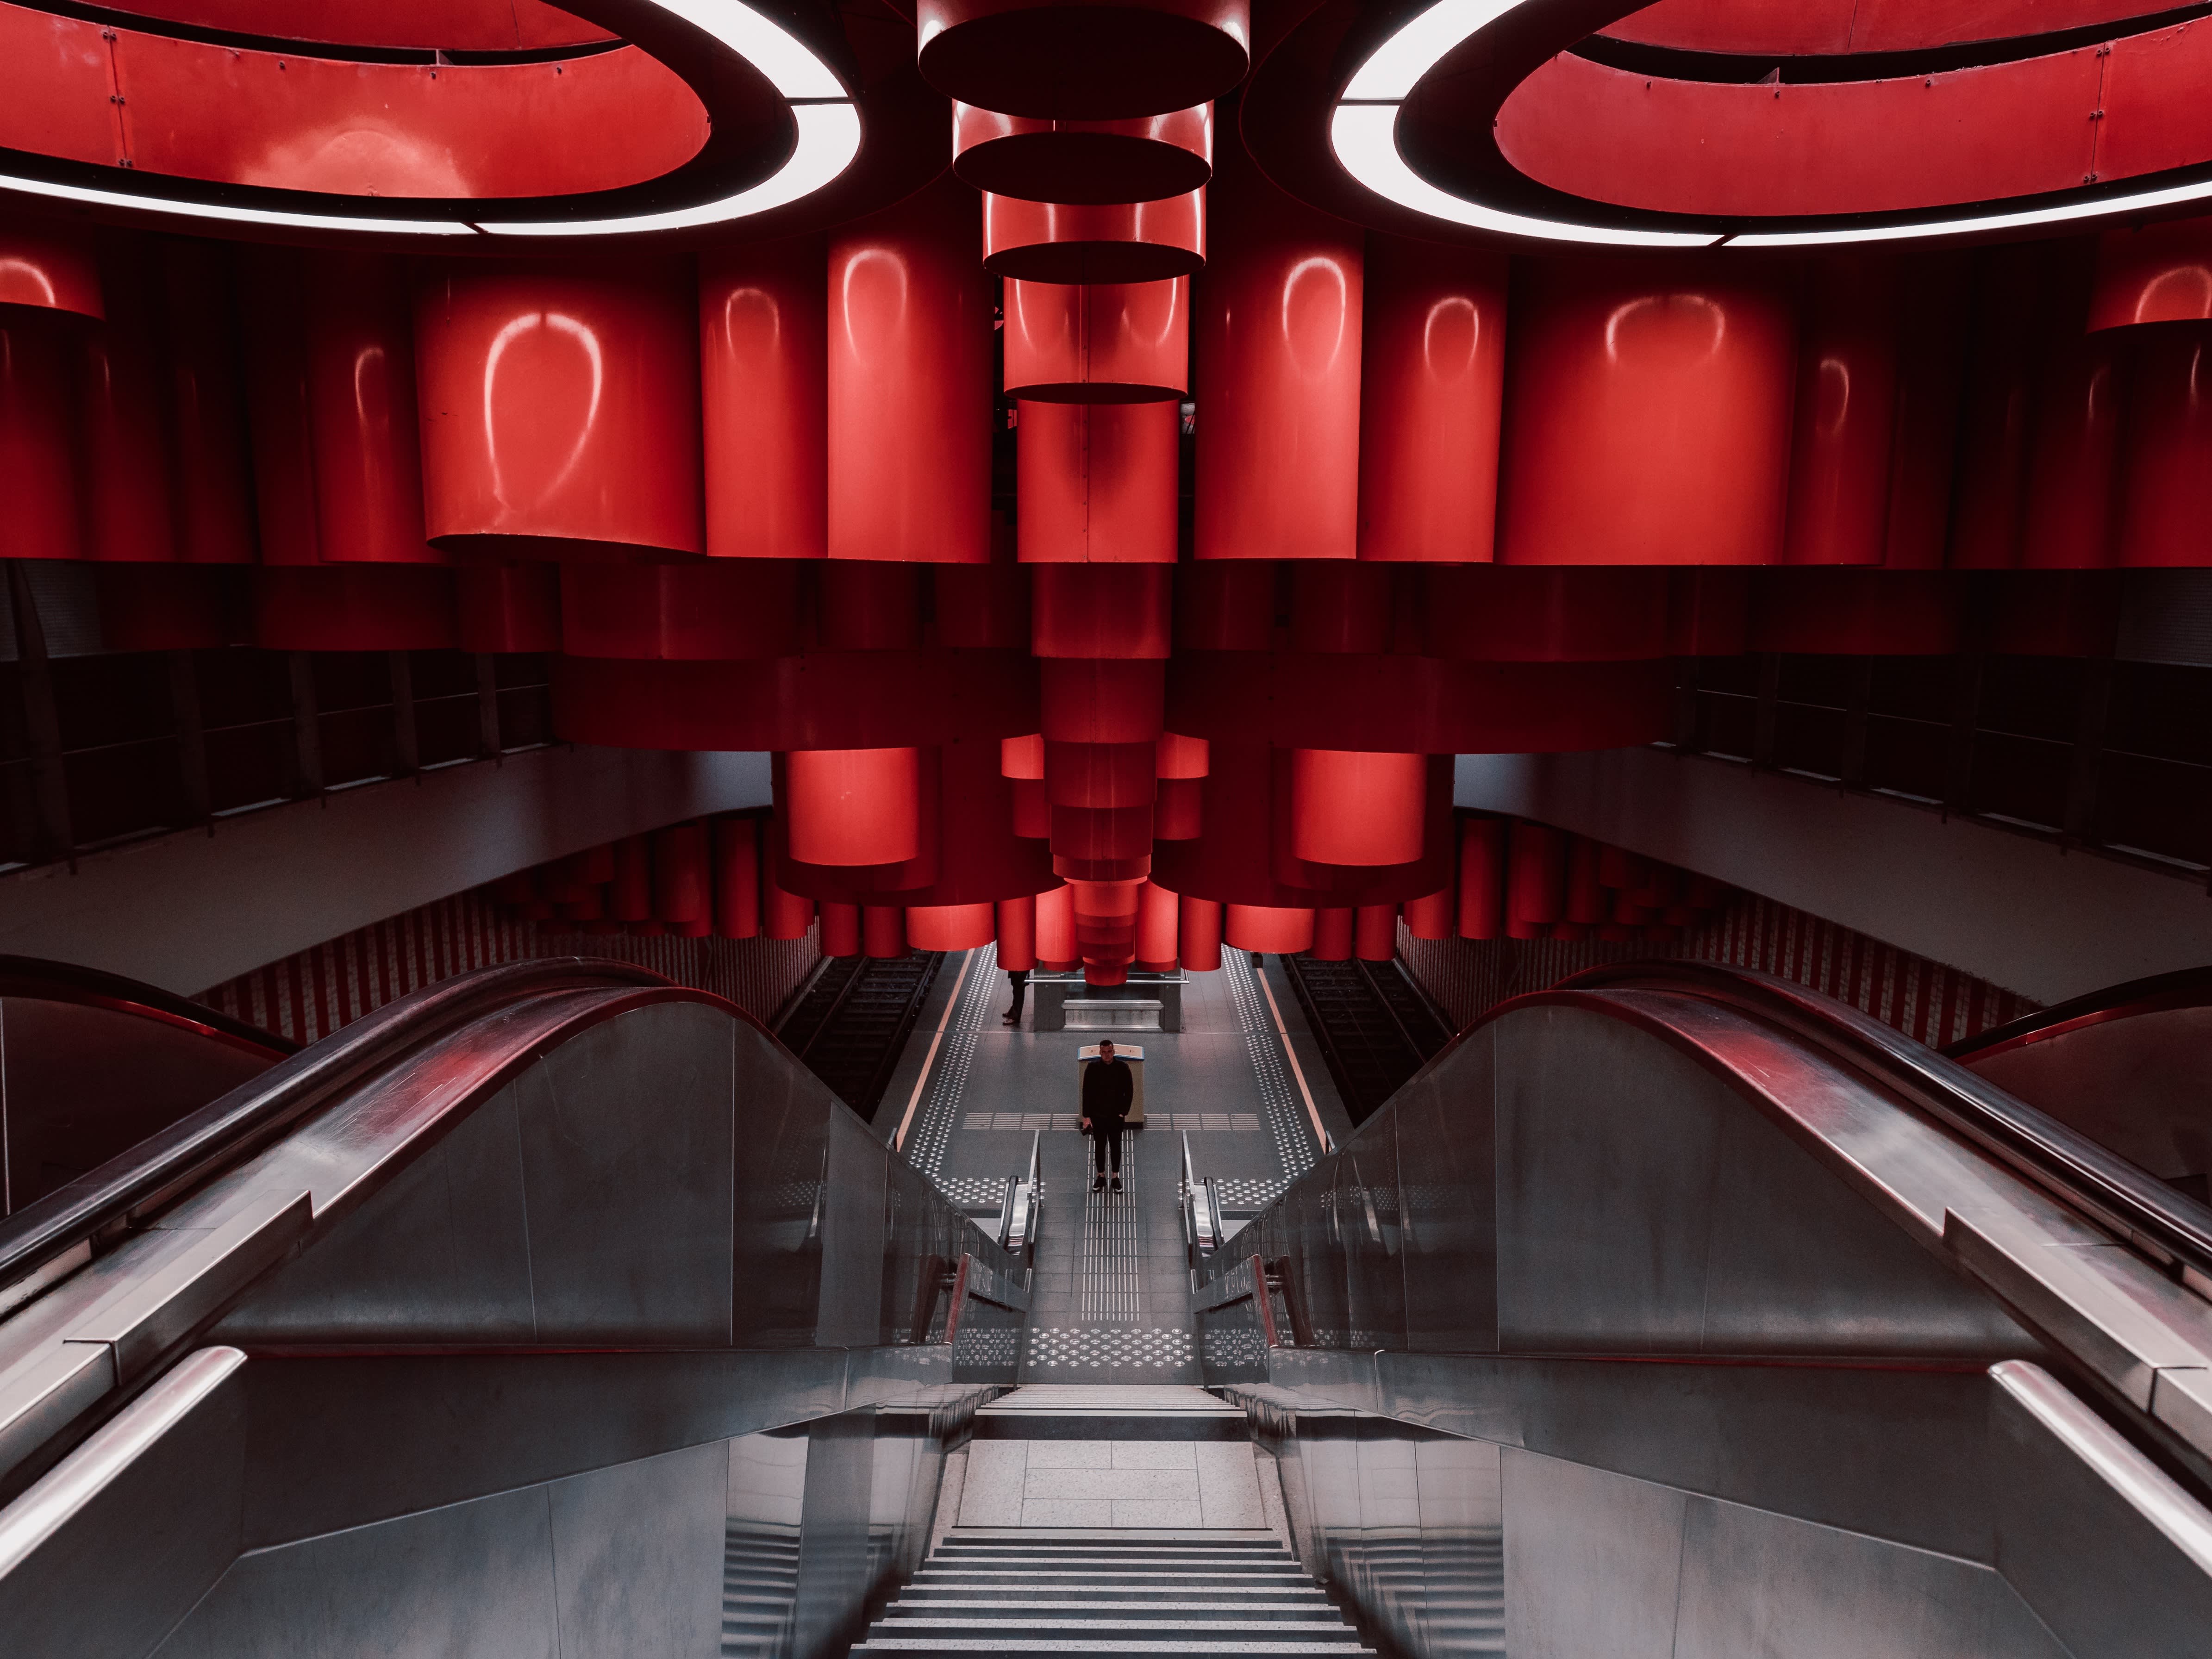 futuristic ceiling with red tubes and shapes above escalator